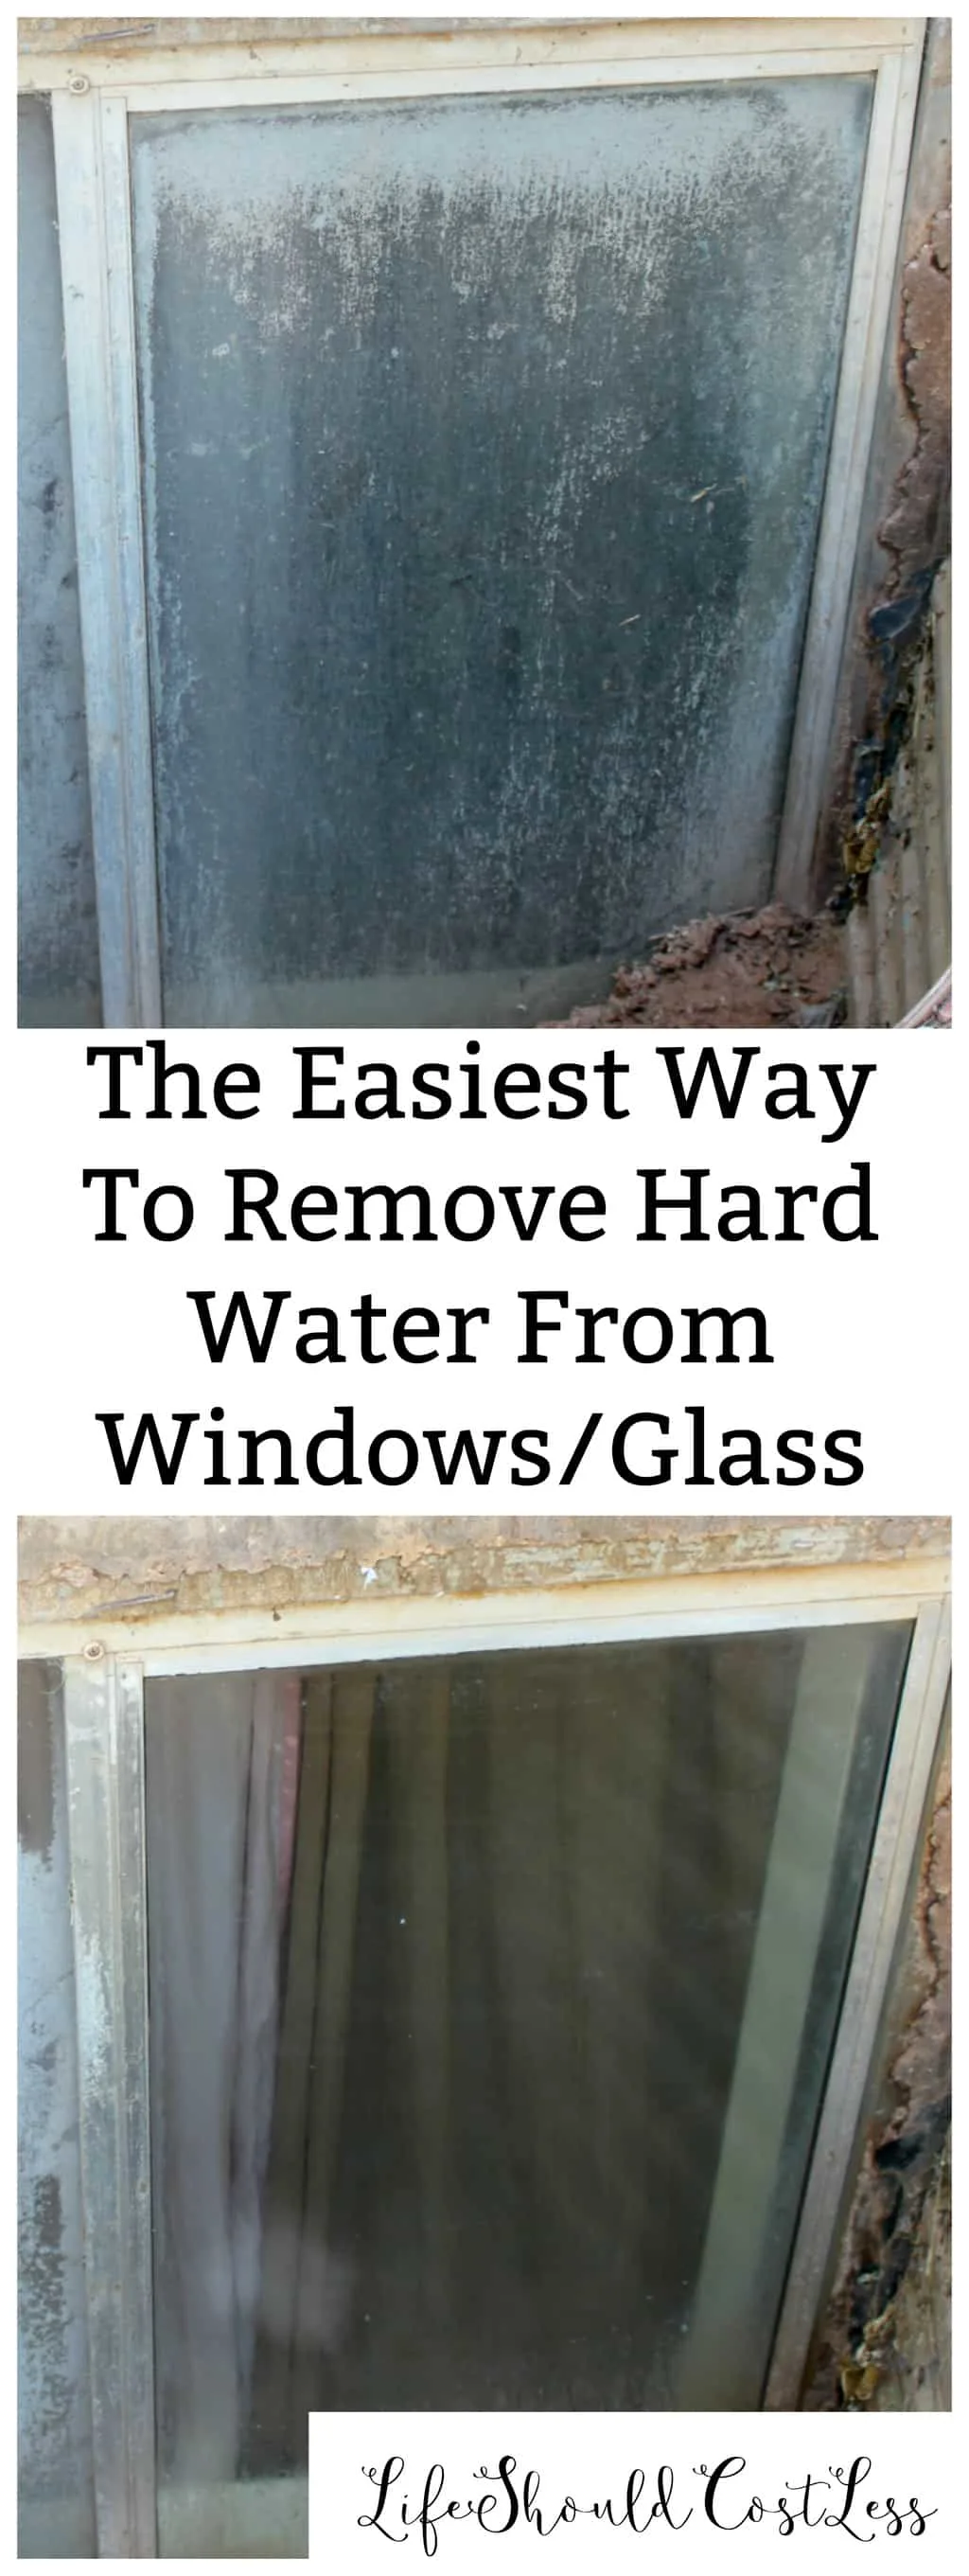 The Easiest Way To Remove Hard Water From Windows/Glass. {lifeshouldcostless.com}